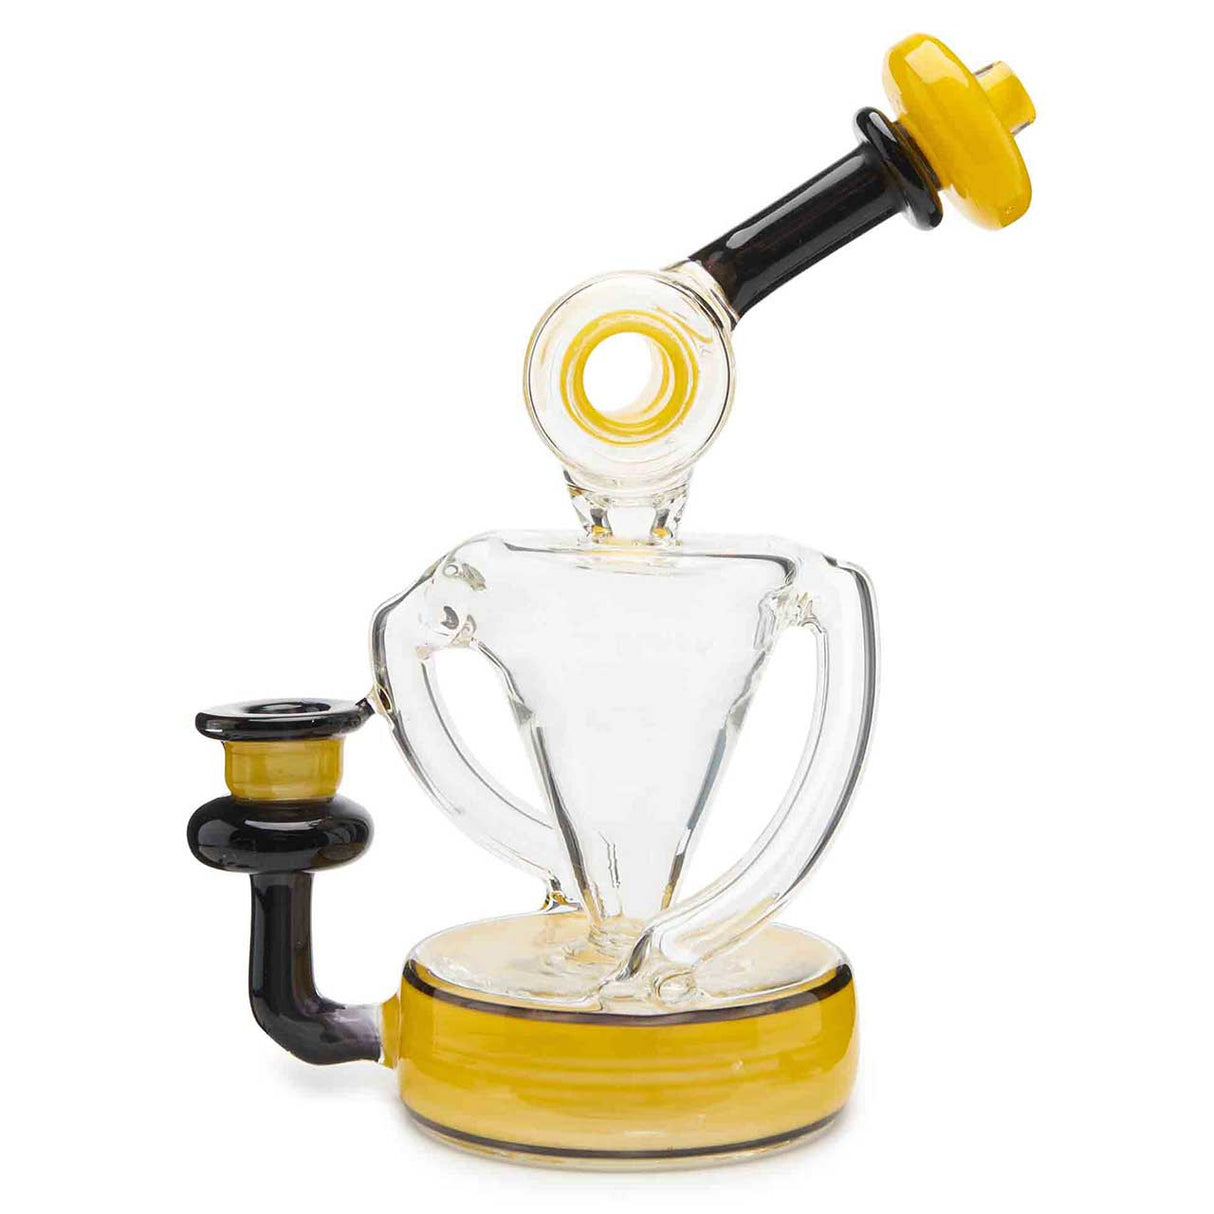 710 Lab Barrel Mouth Recycler Concentrate Dab Rig Bright Yellow Borosilicate Glass Water Pipe